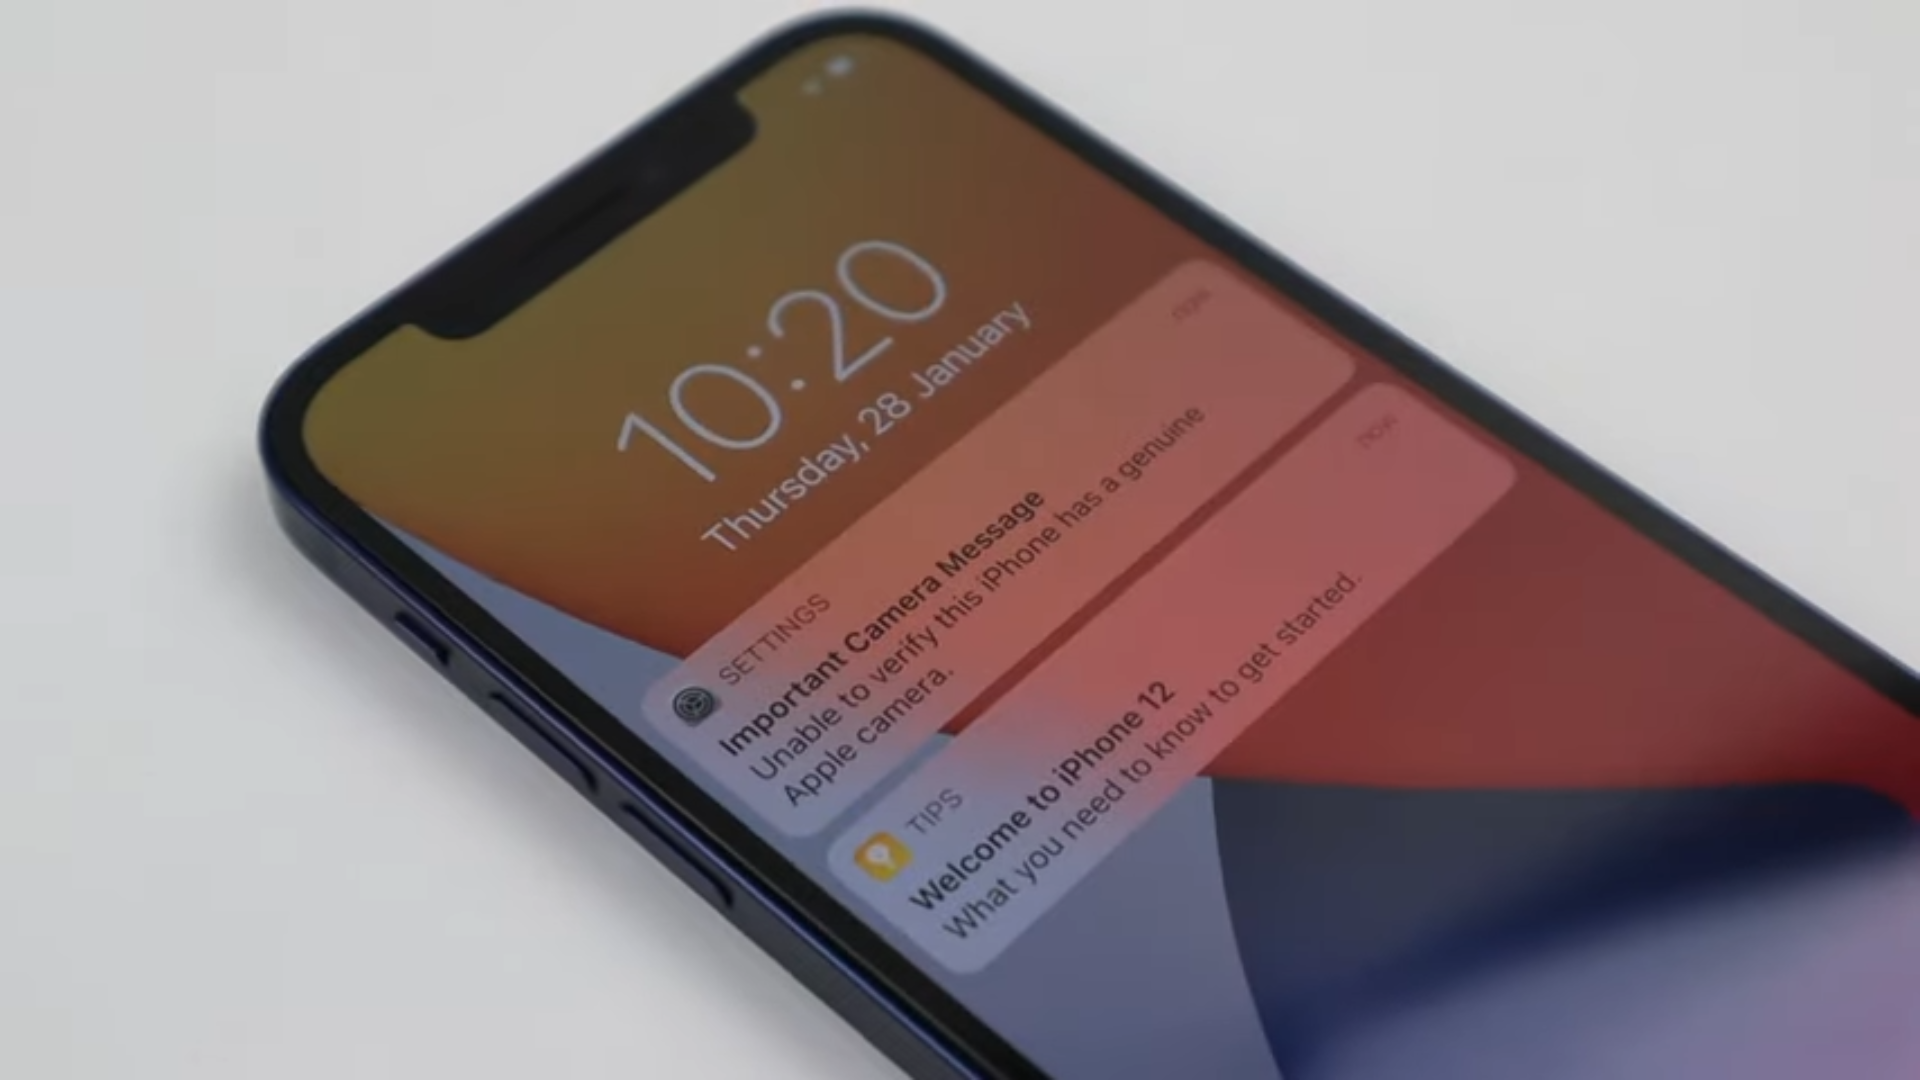 iOS 14.4 contains a new anti-stand-alone repair message, along with security updates